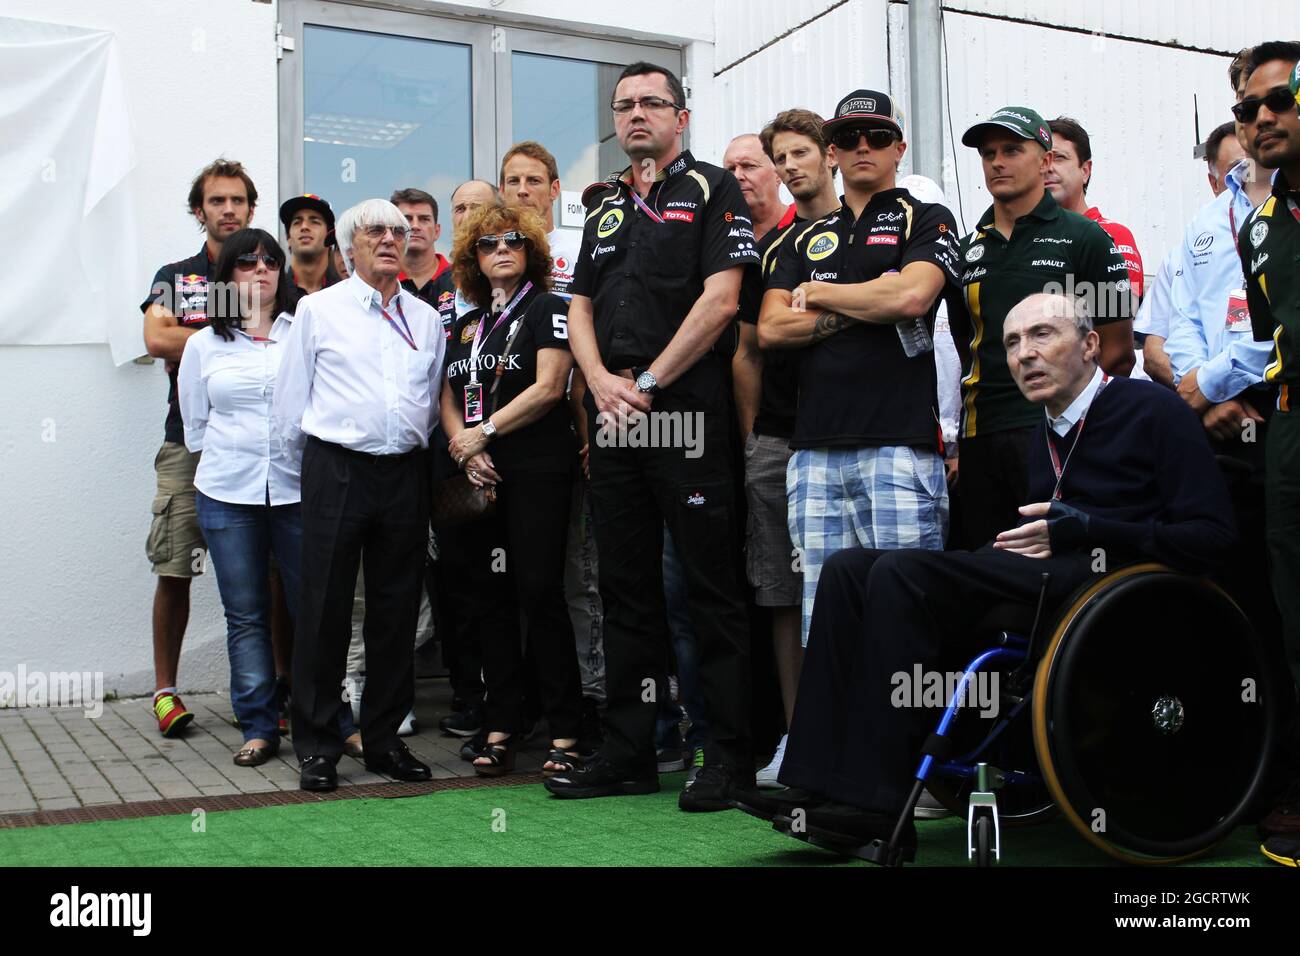 Bernie Ecclestone (GBR) CEO Formula One Group (FOM), drivers and key team personnel pay their respects to the Hungarian GP Promoter Tamas Frank, who died last month. Hungarian Grand Prix, Saturday 28th July 2012. Budapest, Hungary. Stock Photo